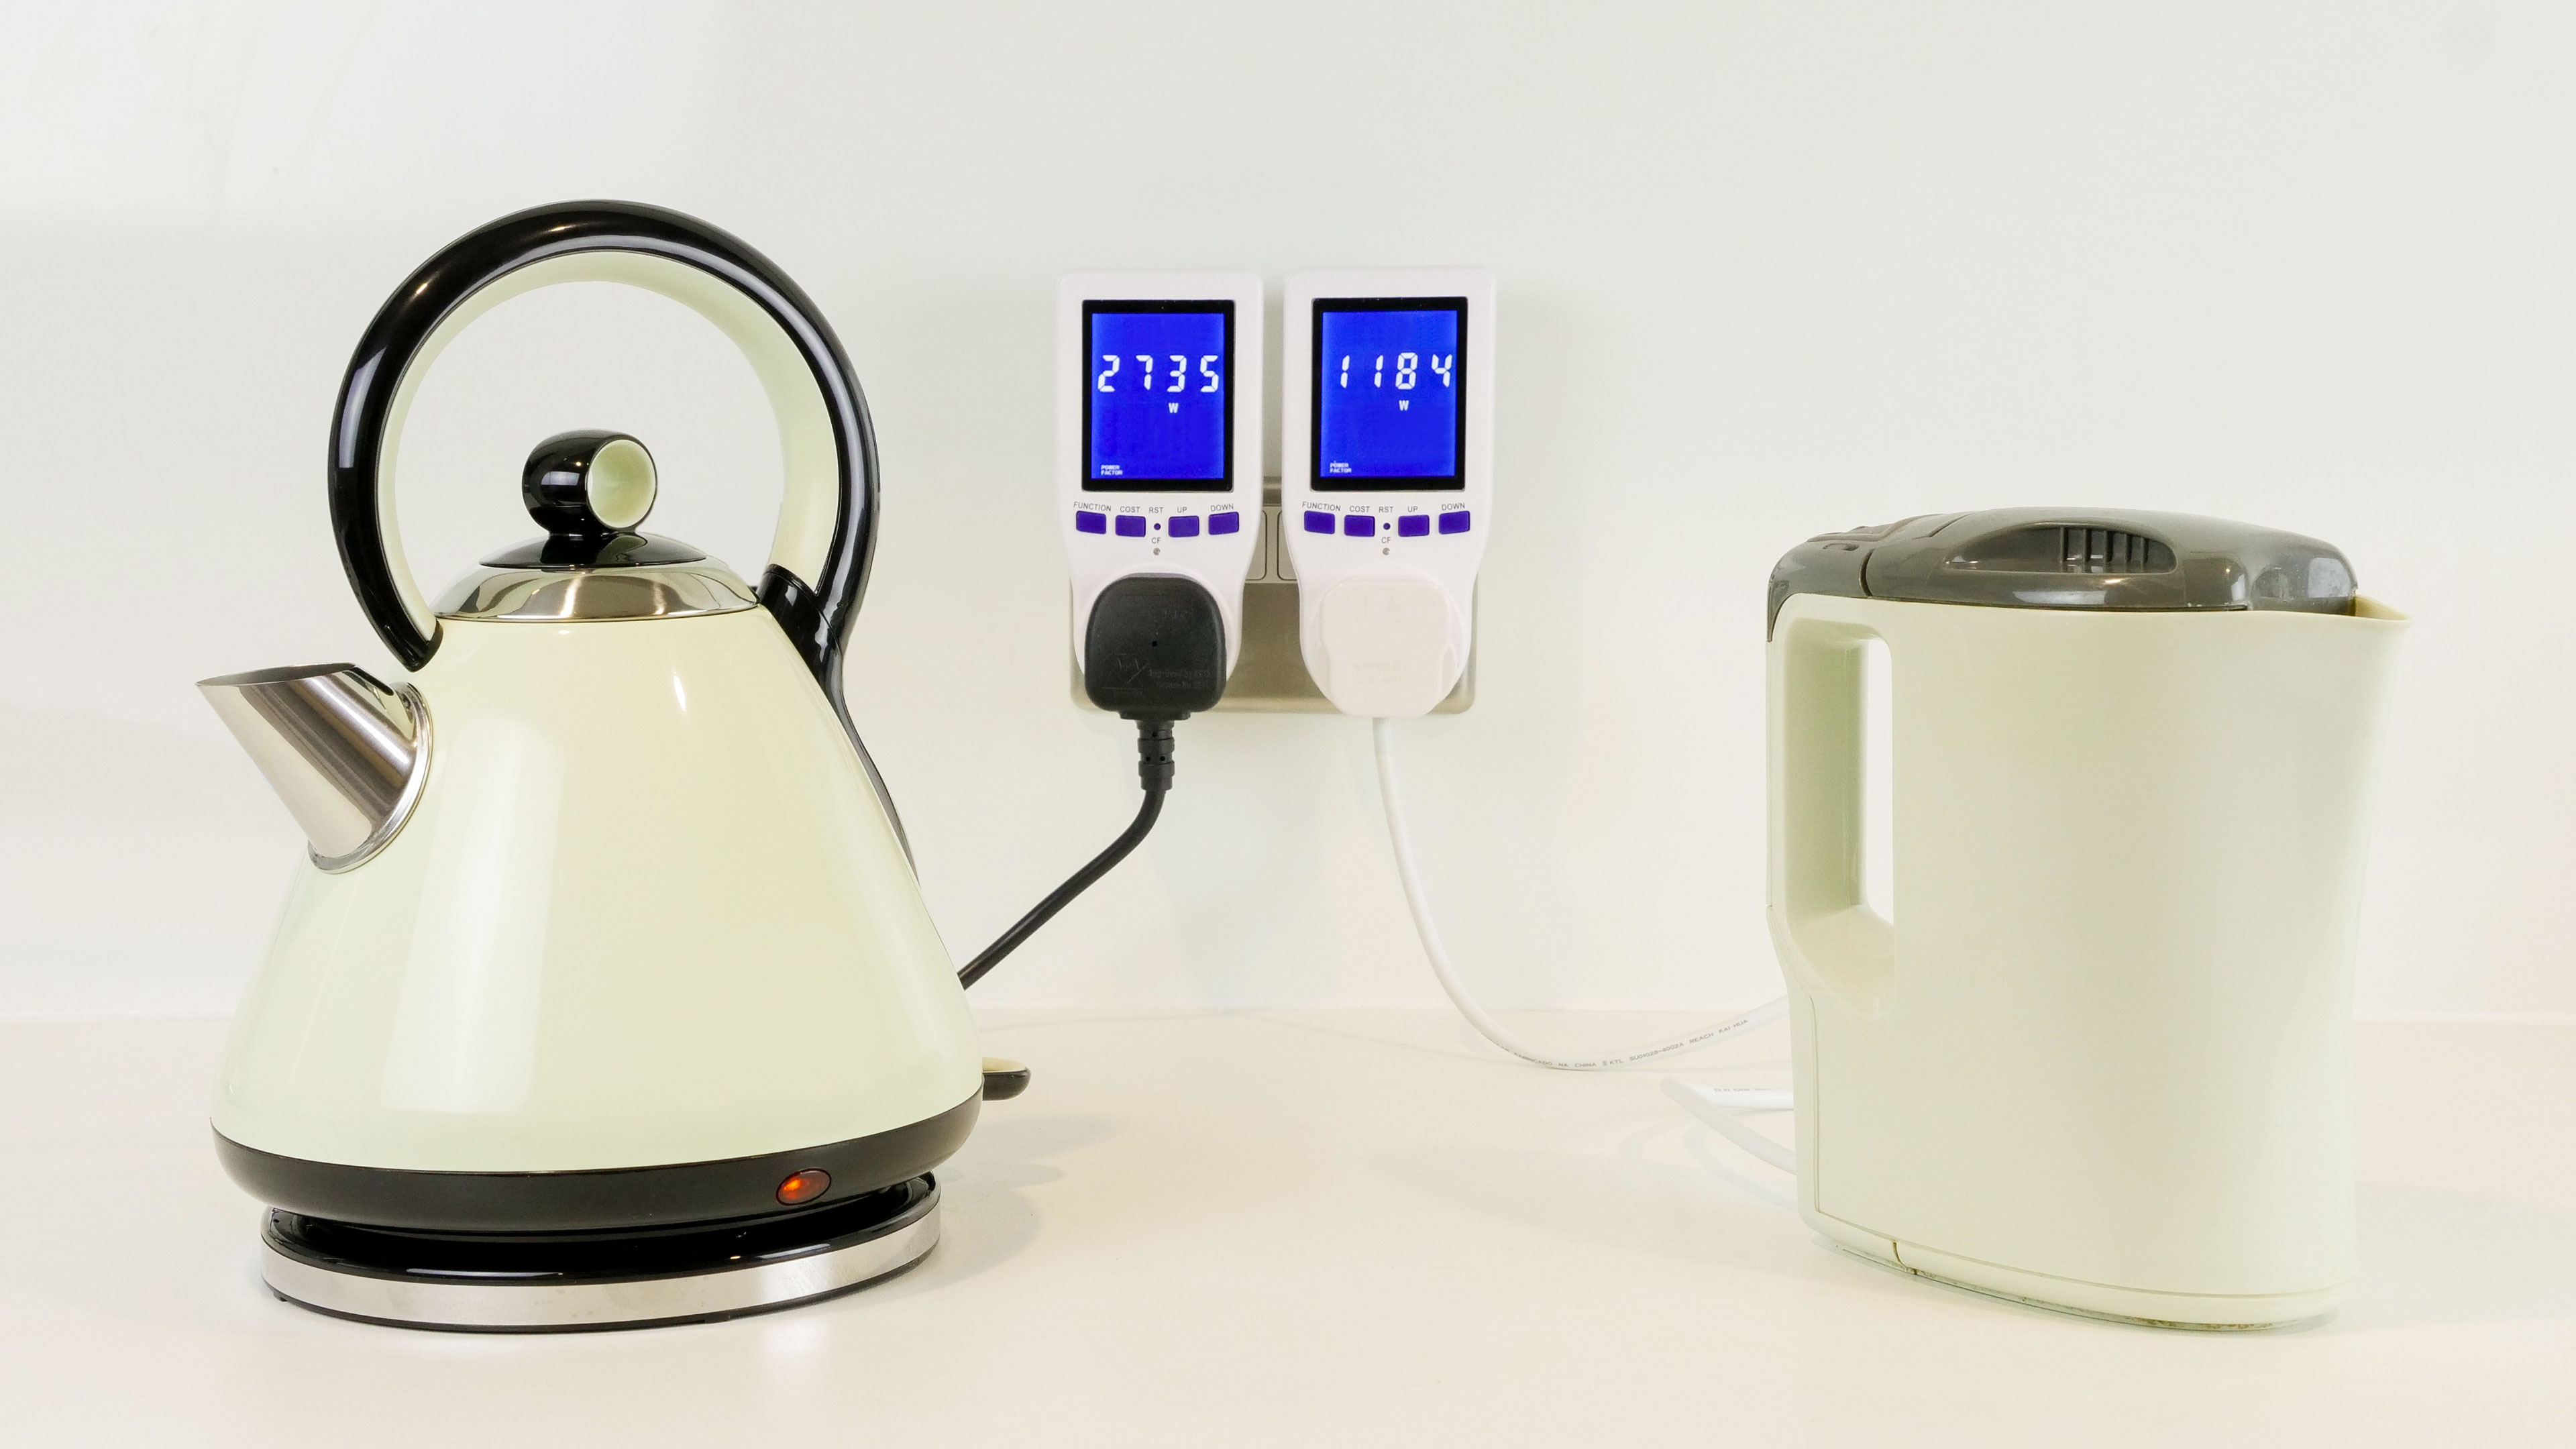 Kettle Plugged Photos, Images and Pictures